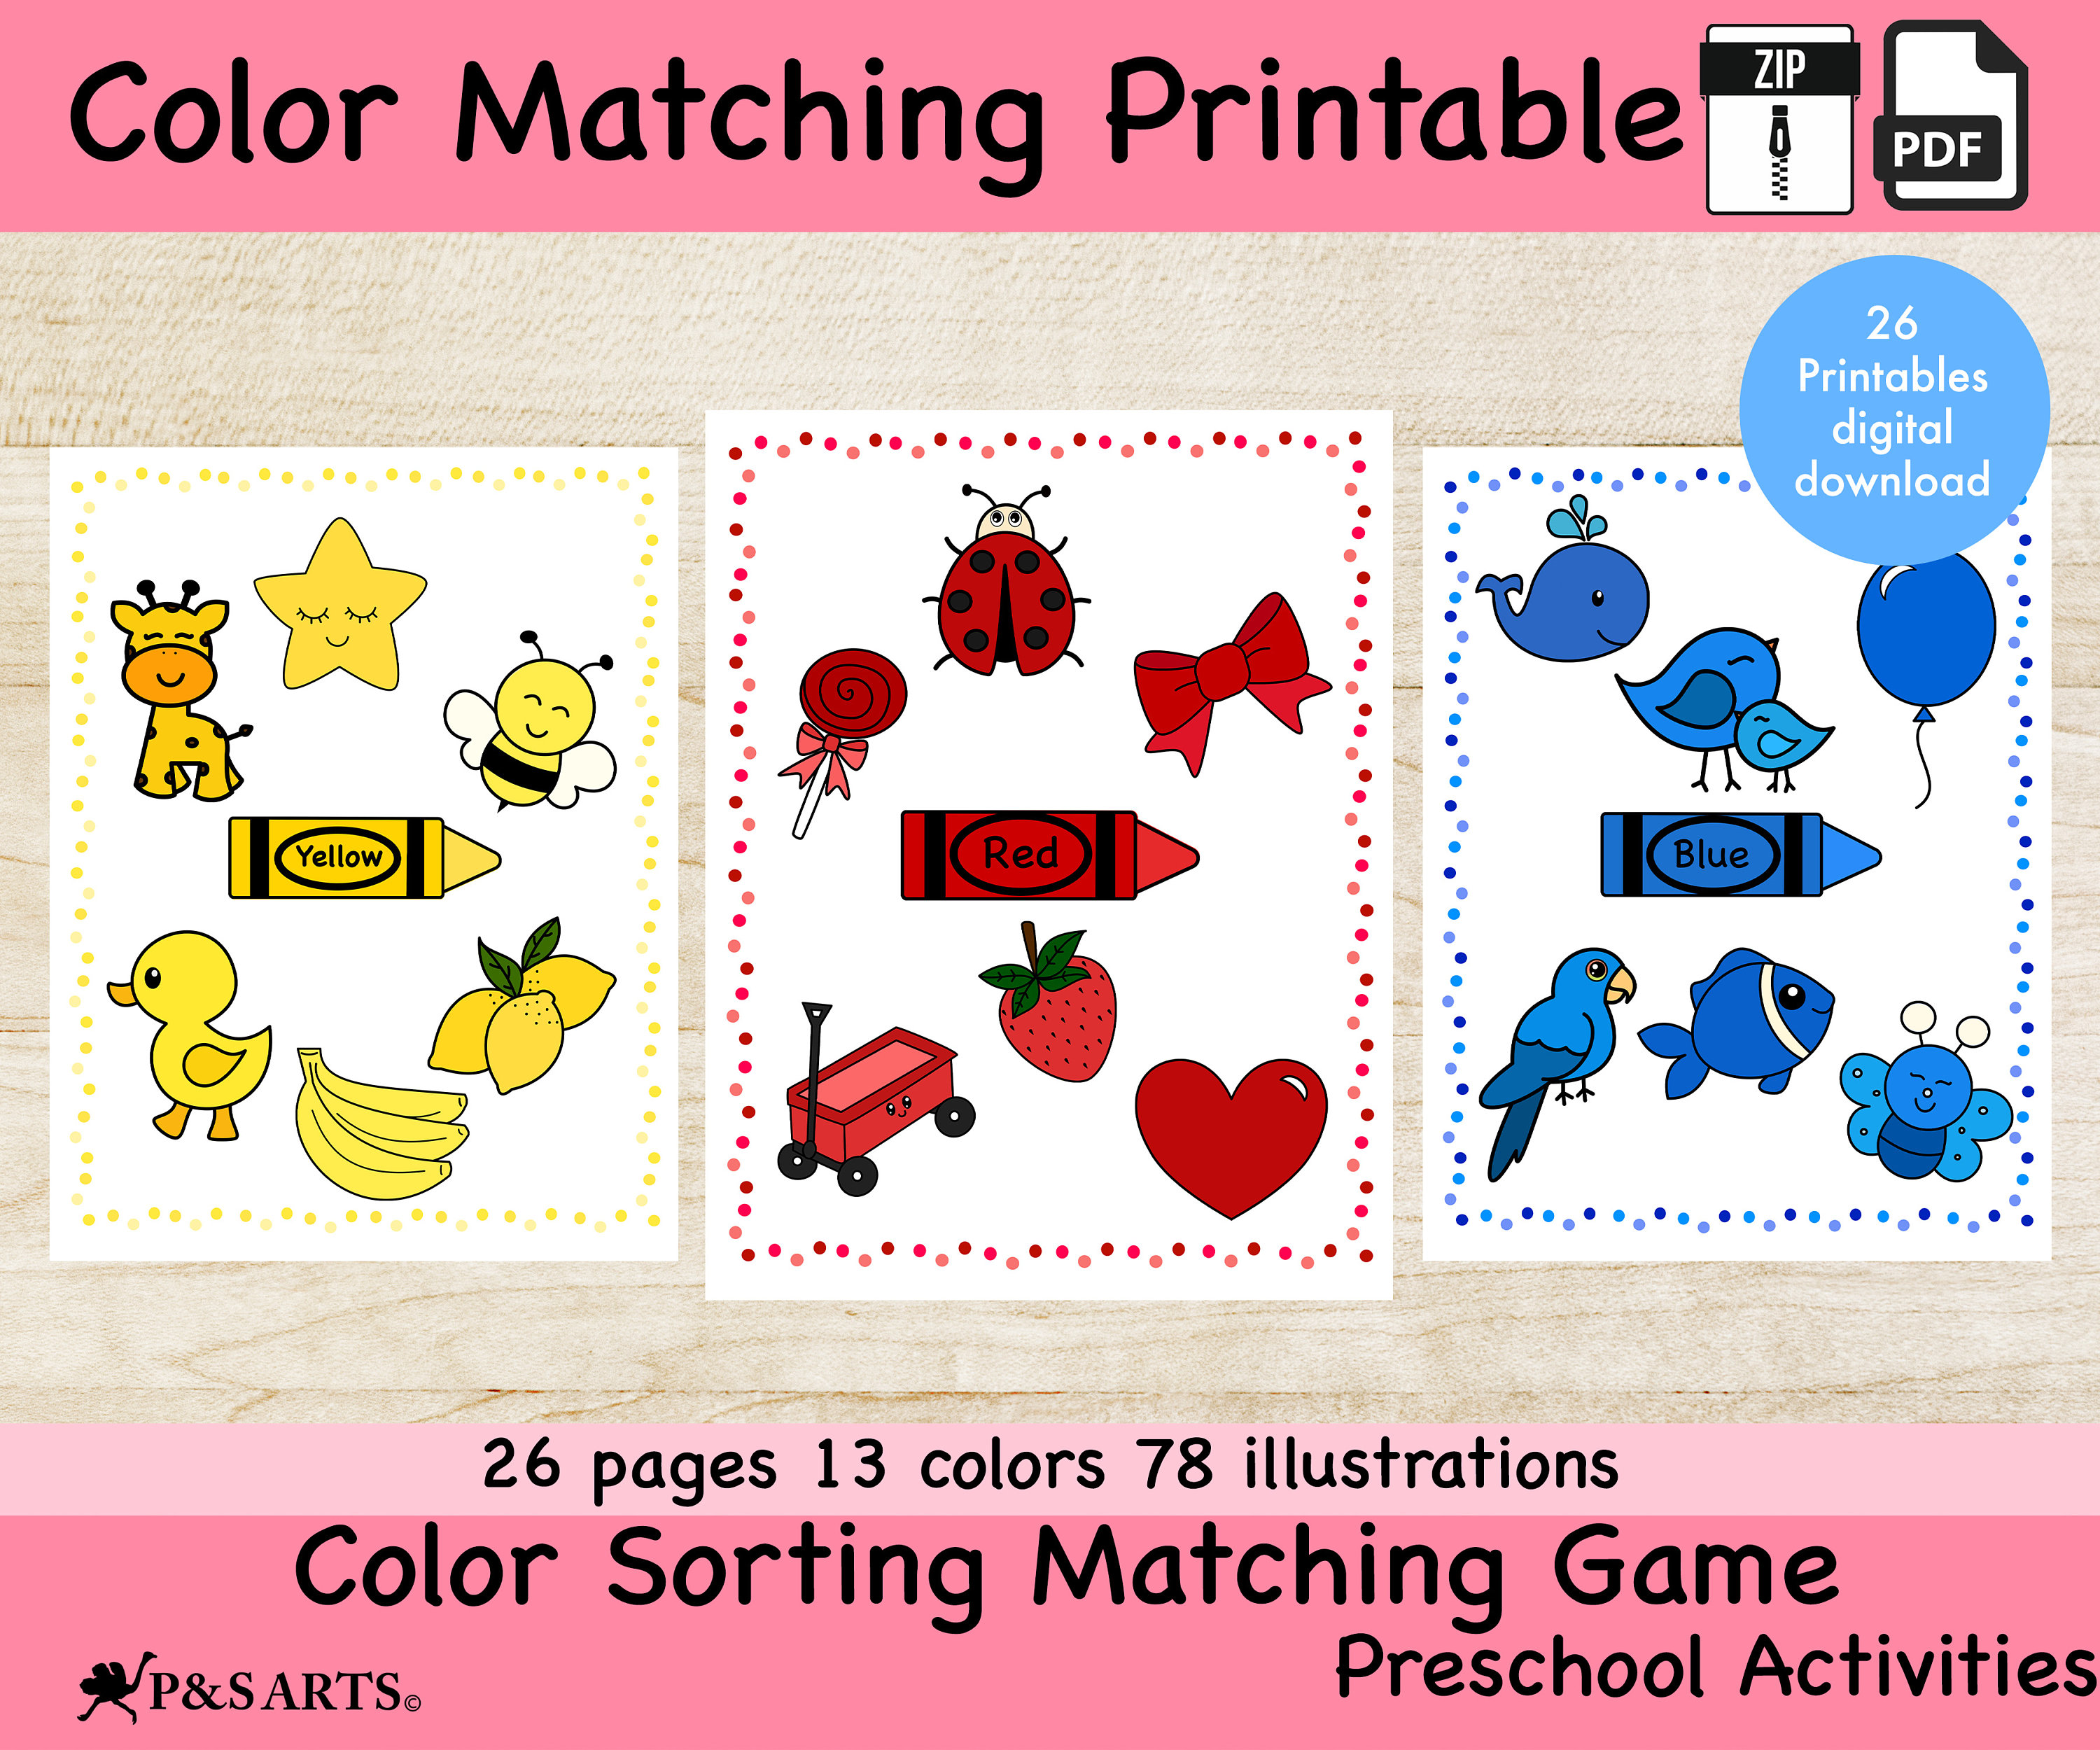 Color Match Activity - Toddler at Play